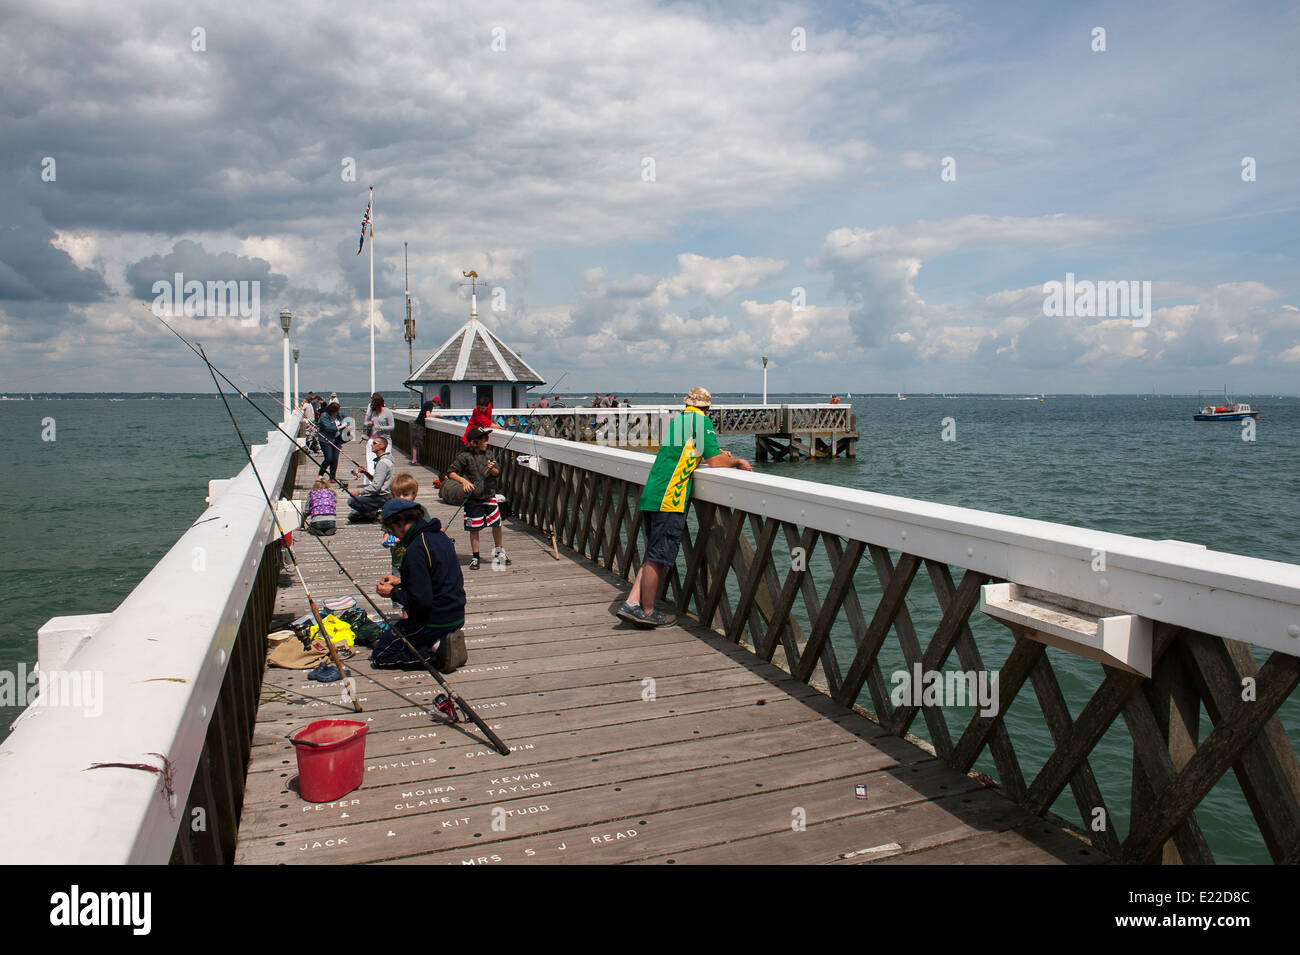 Families fishing off of Yarmouth pier on the Isle of Wight, England. Stock Photo